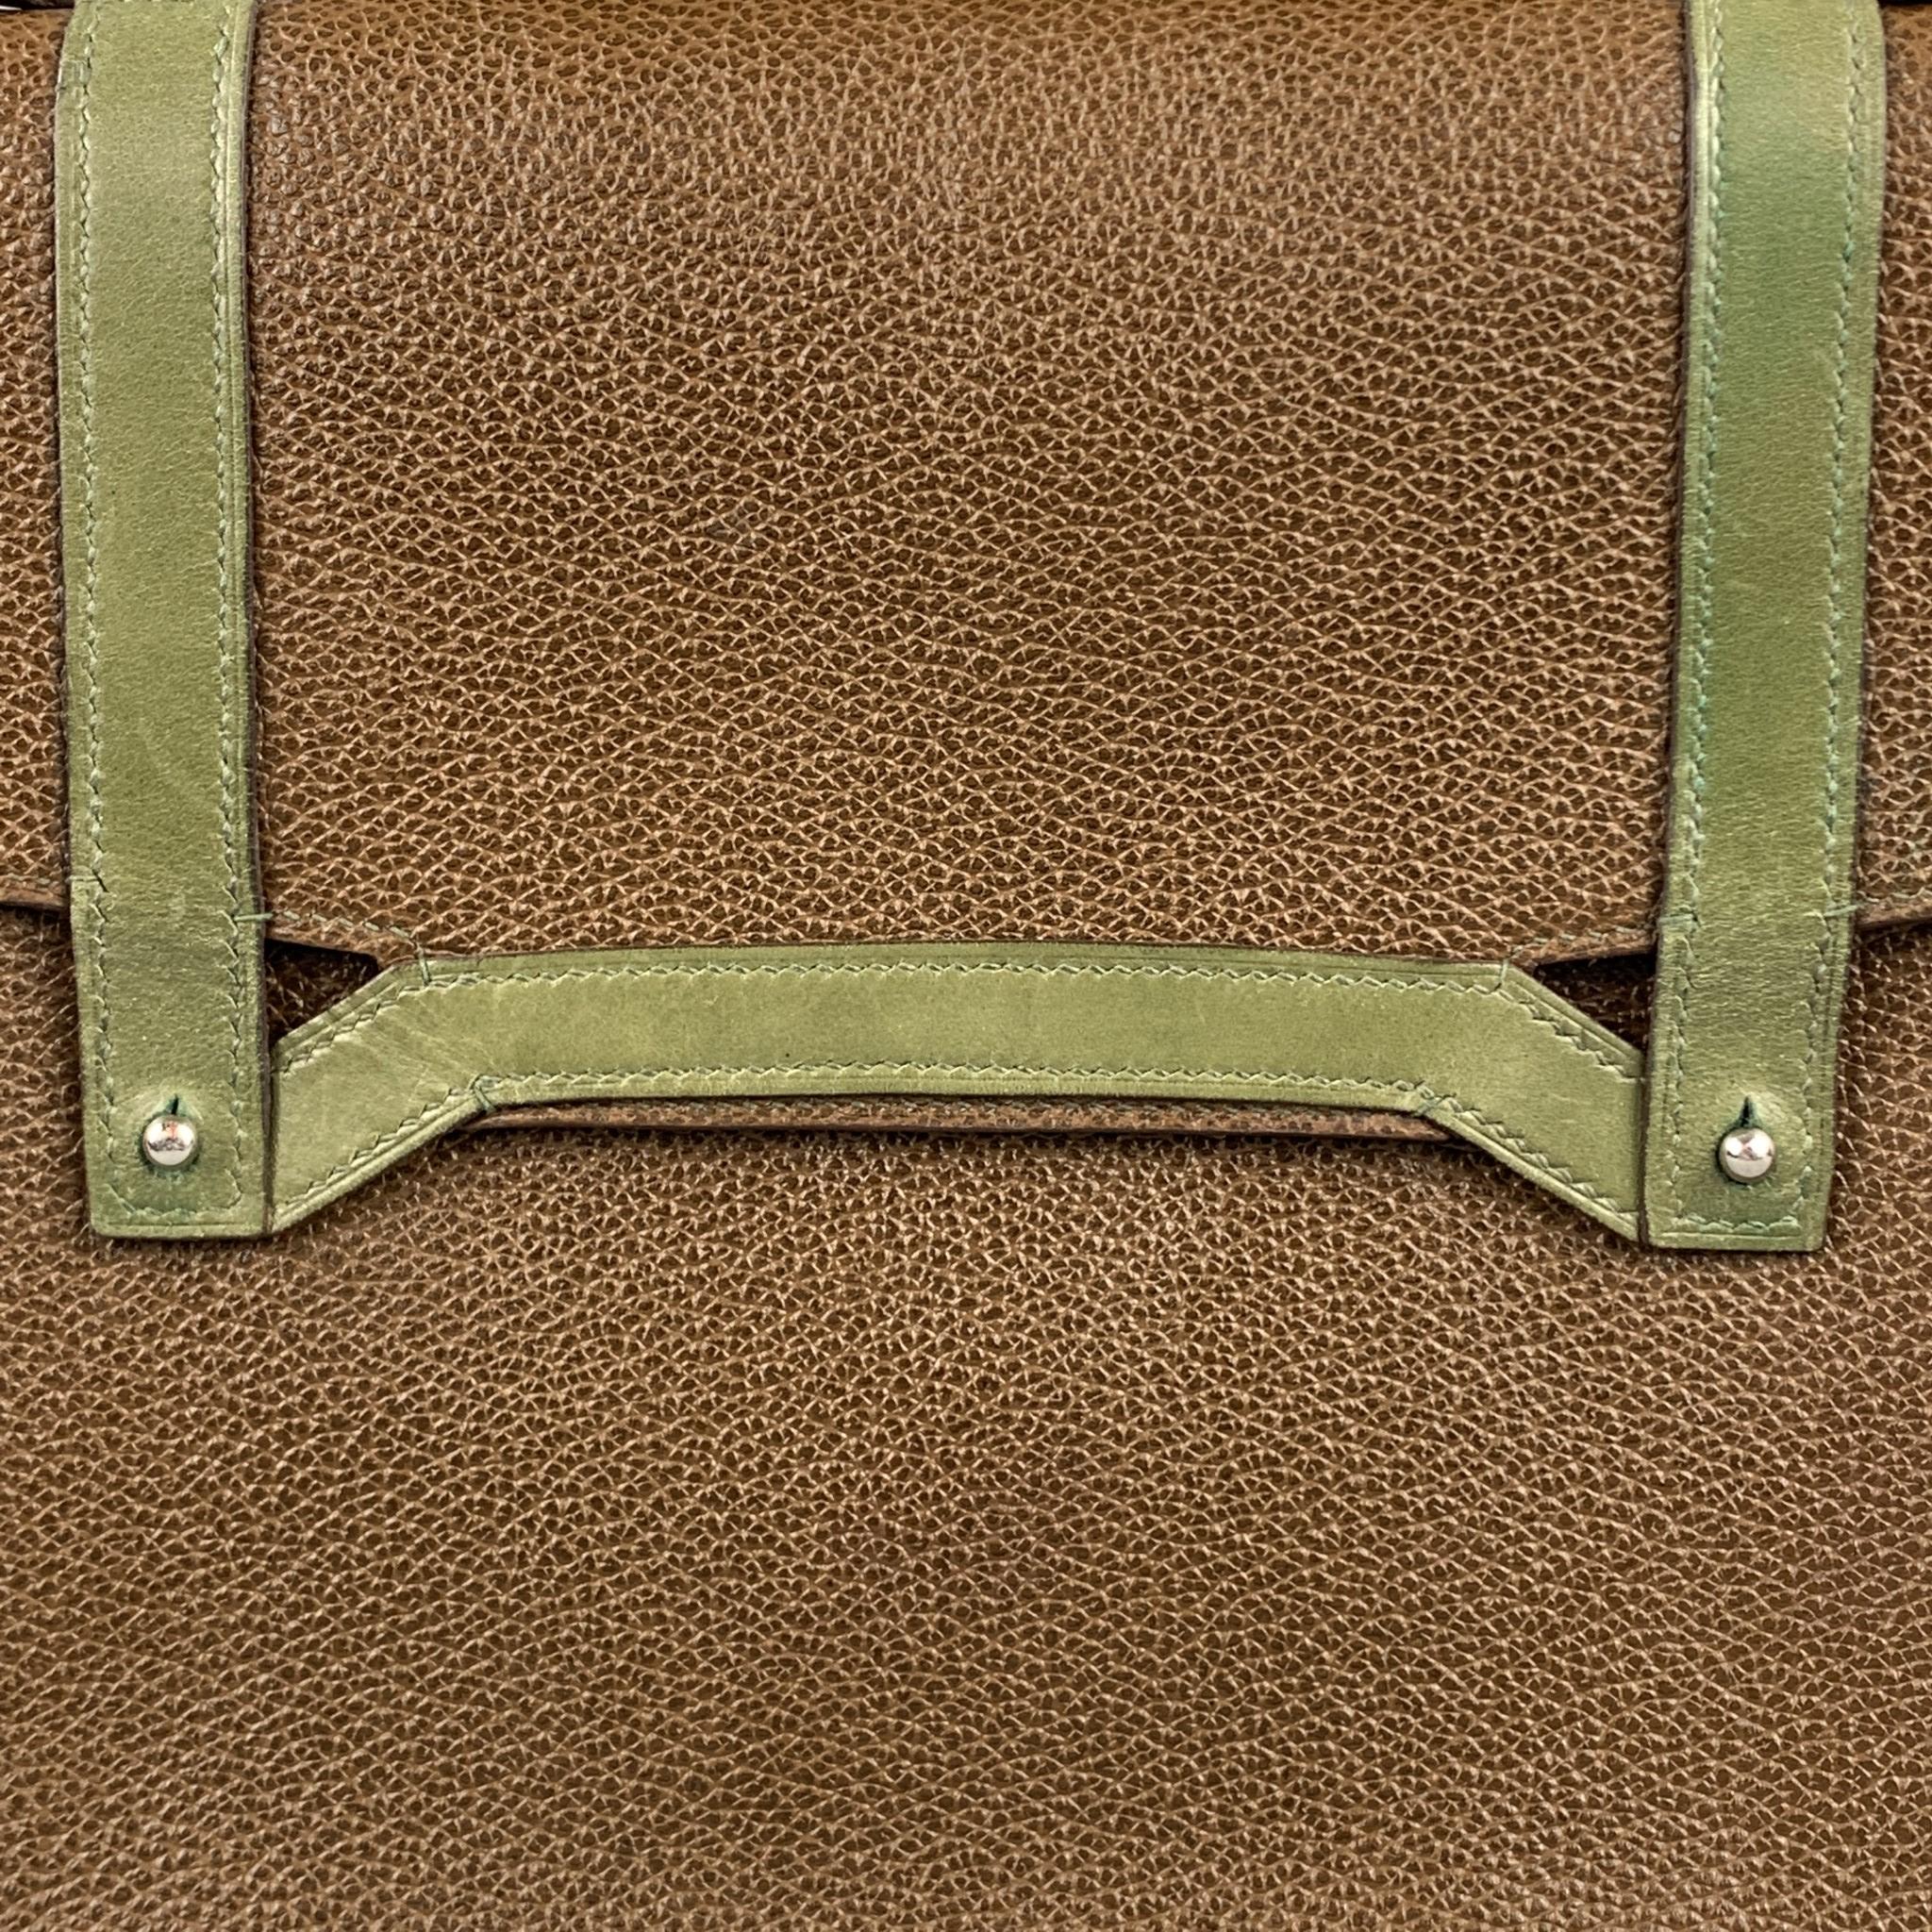 APRIL in PARIS bag comes in a brown textured leather with a olive trim featuring a top handle, inner slots, and a front button closure. Handmade in San Francisco.

Excellent Pre-Owned Condition.
Original Retail Price: